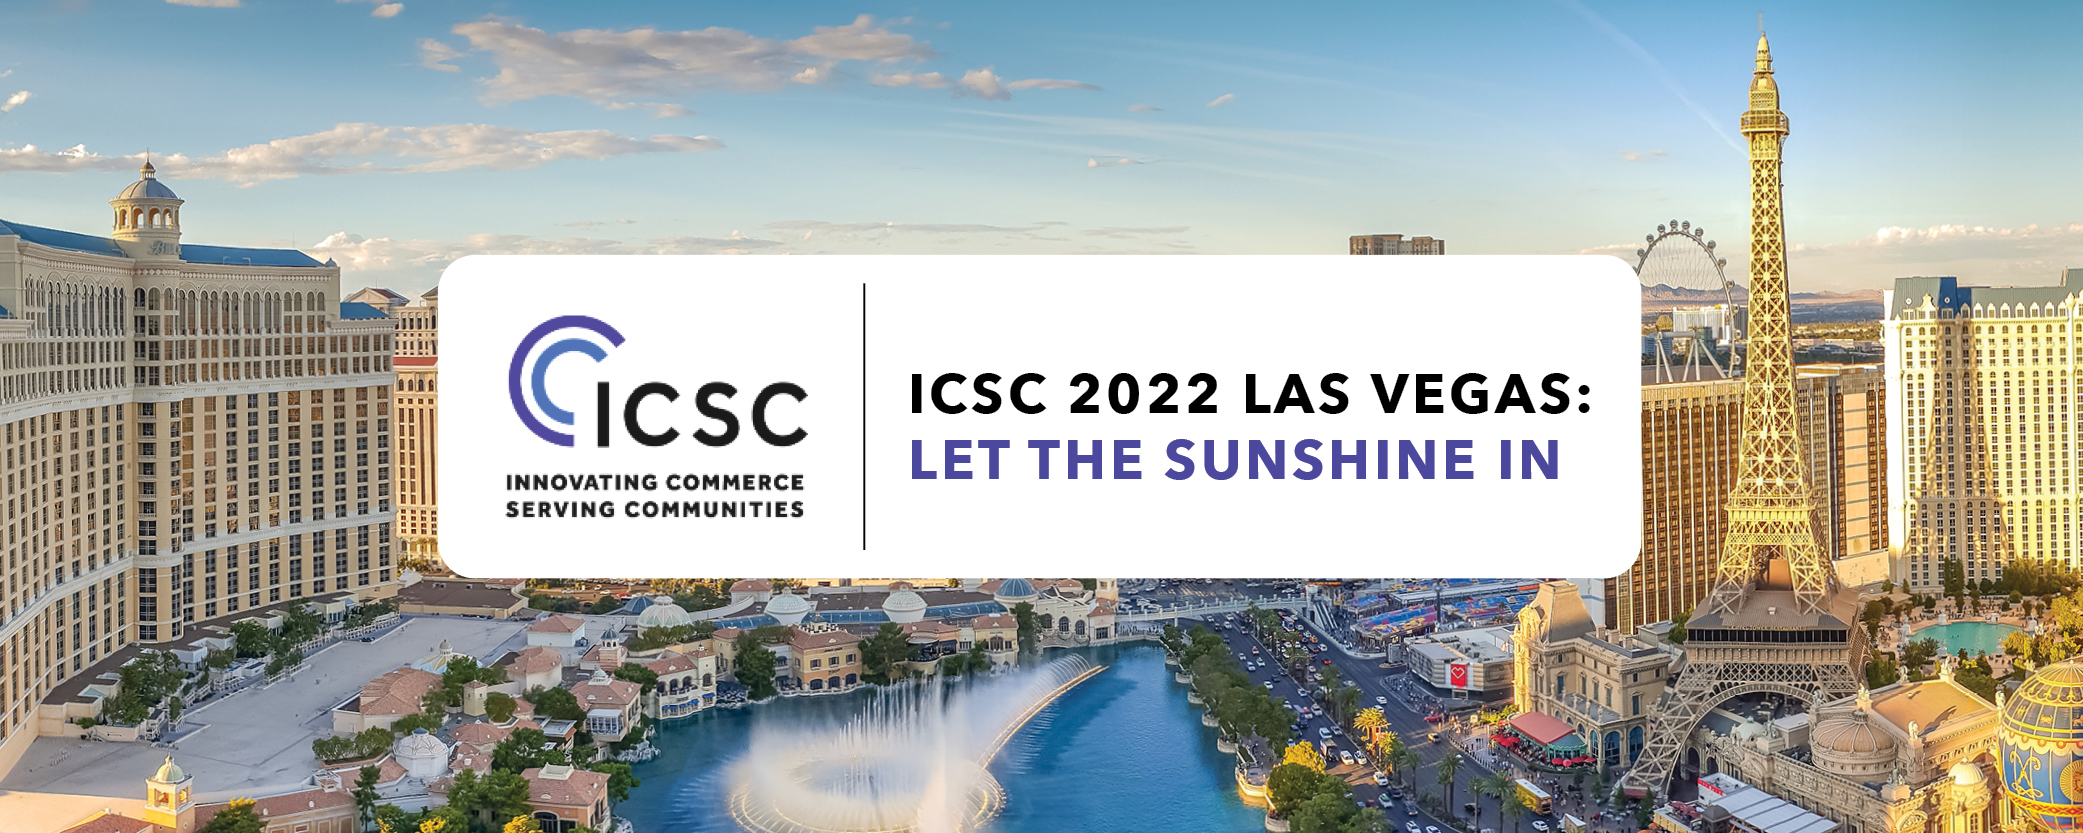 Icsc 2022 – let the sunshine in